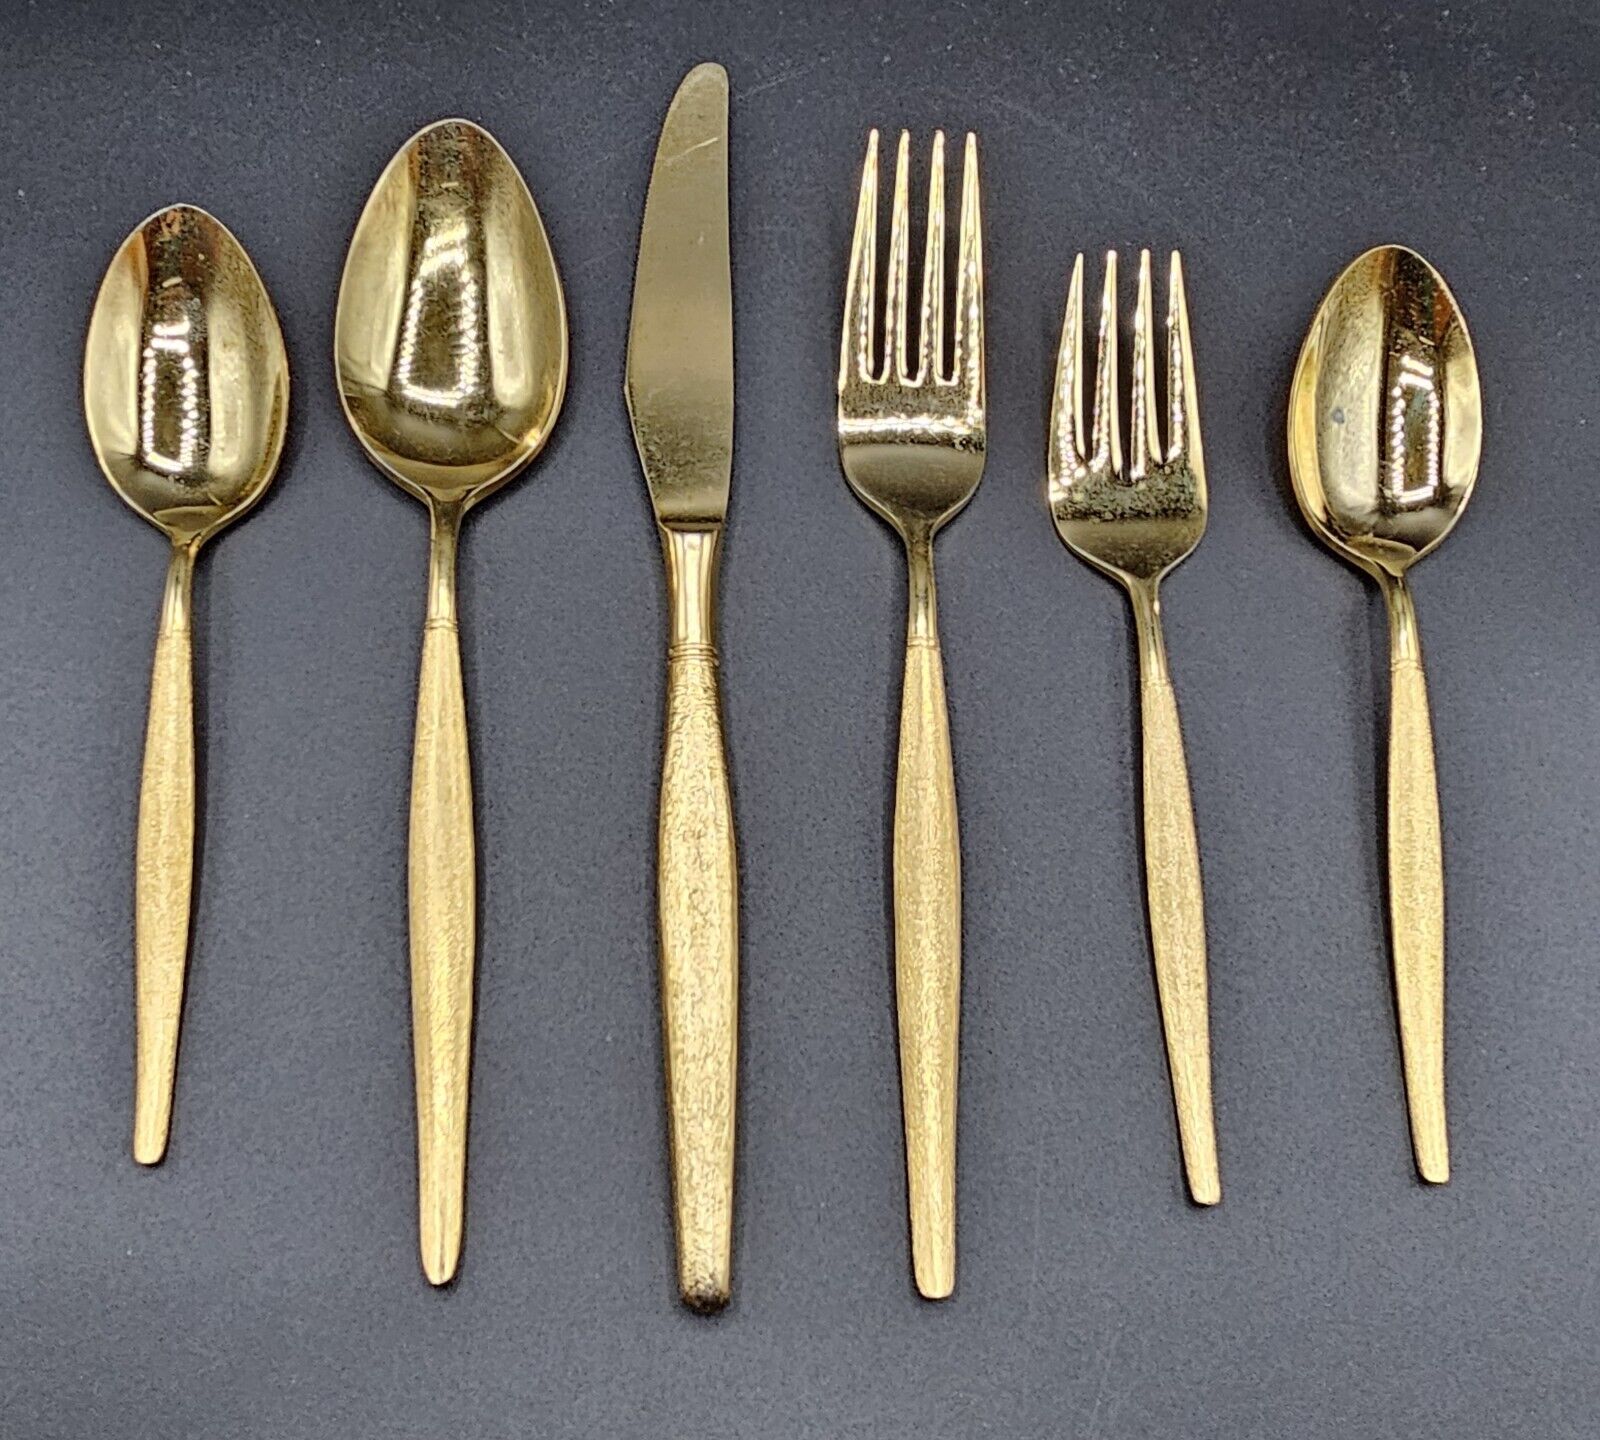 VIP Gold-Tone Stainless 6 Piece Place Setting Flatware/Silverware w Sleeve VTG